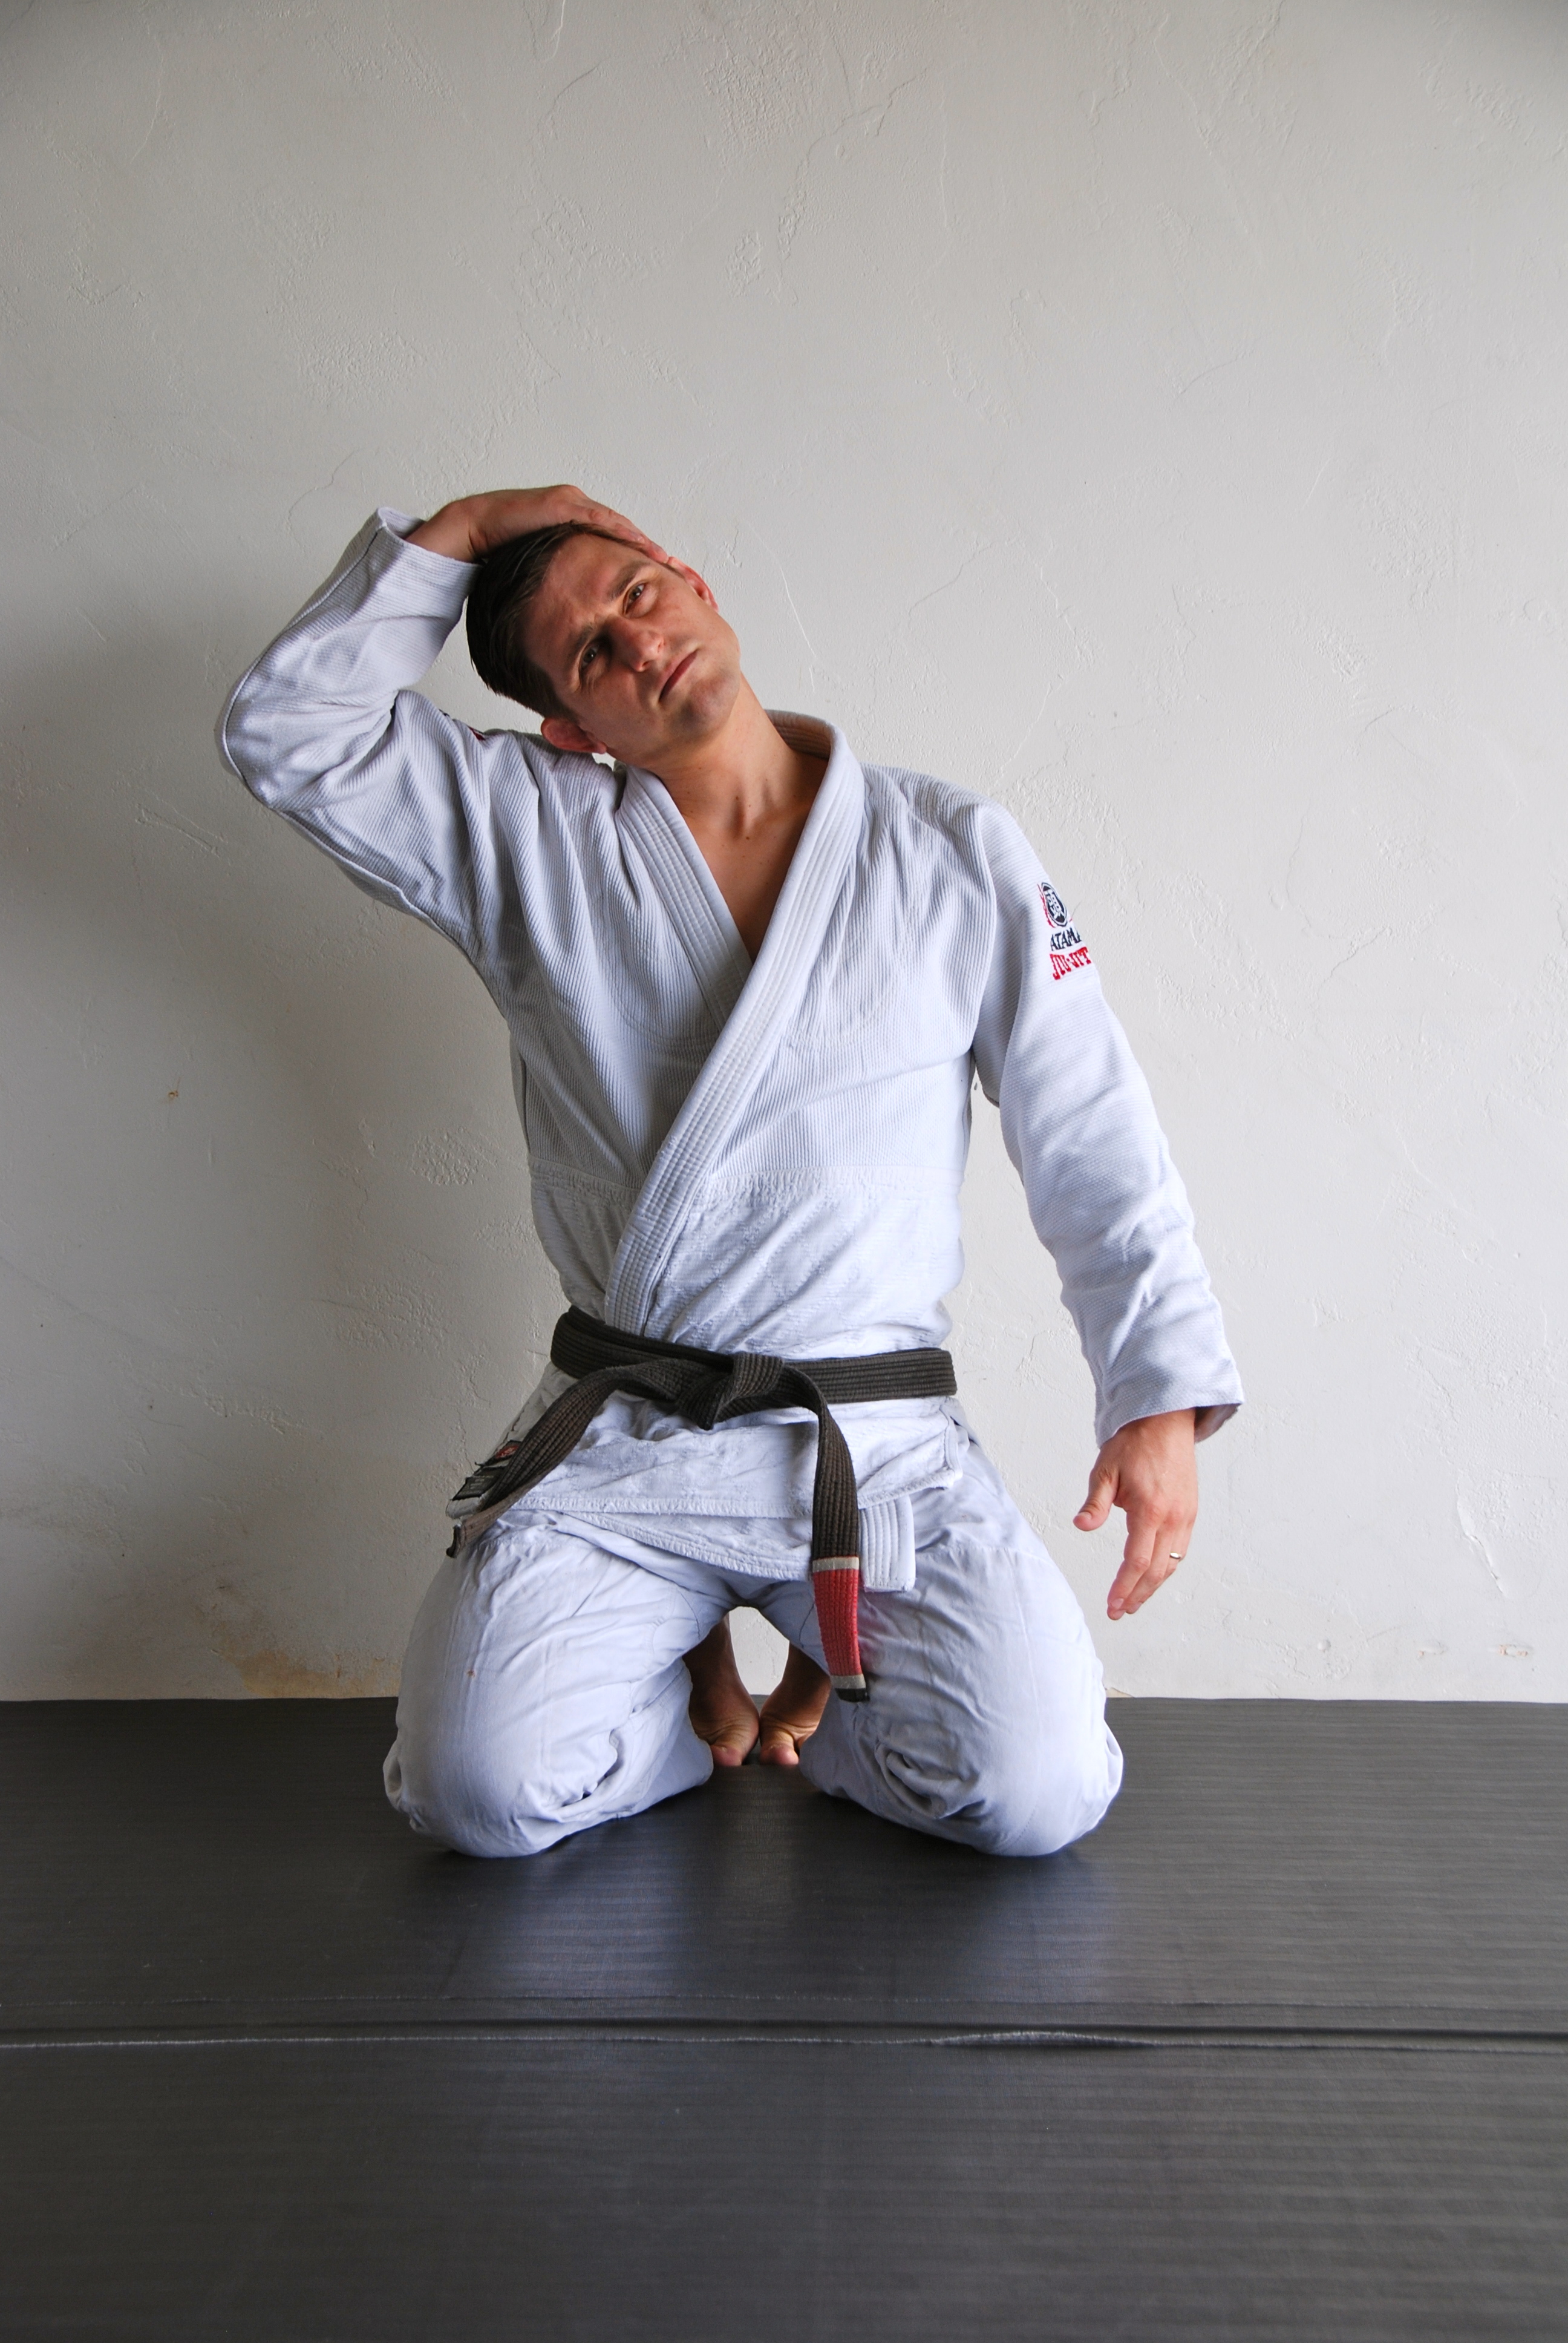 Preventing Common BJJ and CrossFit Injuries